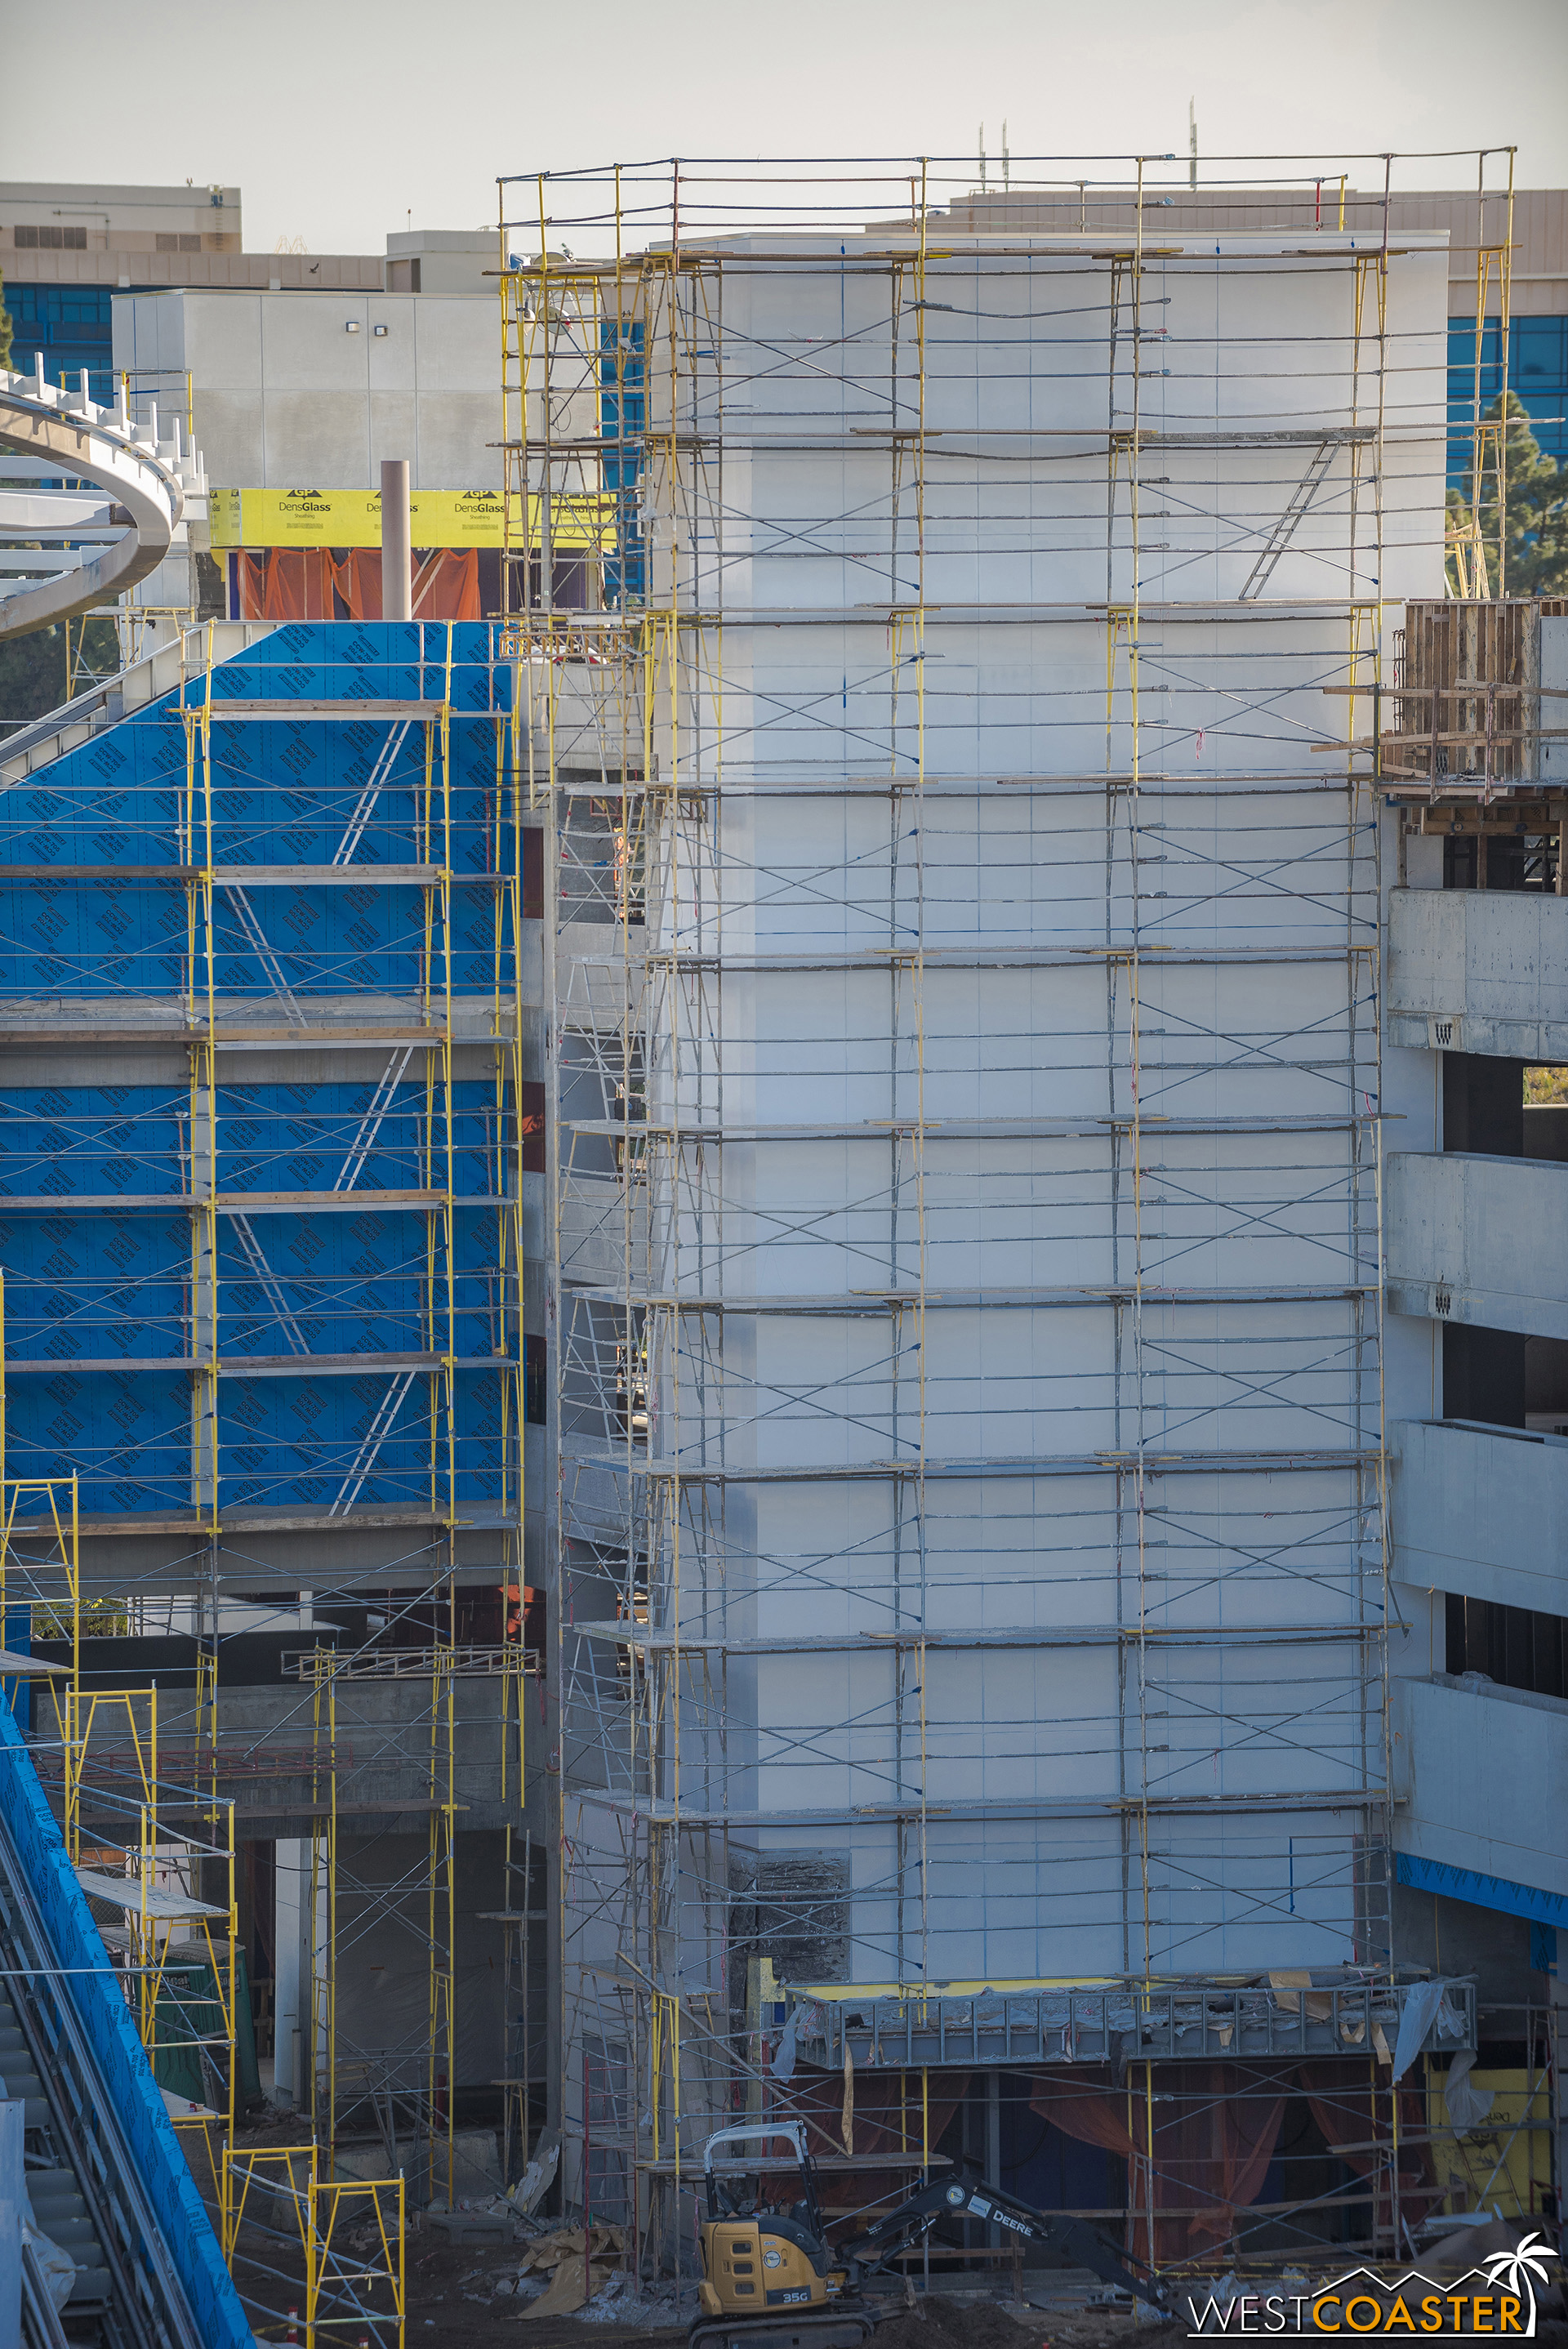  The elevator towers are being wrapped up.  Over in the existing structure, the building material is an aluminum composite metal panel.  But here, it looks like they’re using plaster (stucco) with joints to mimic the panel look! 